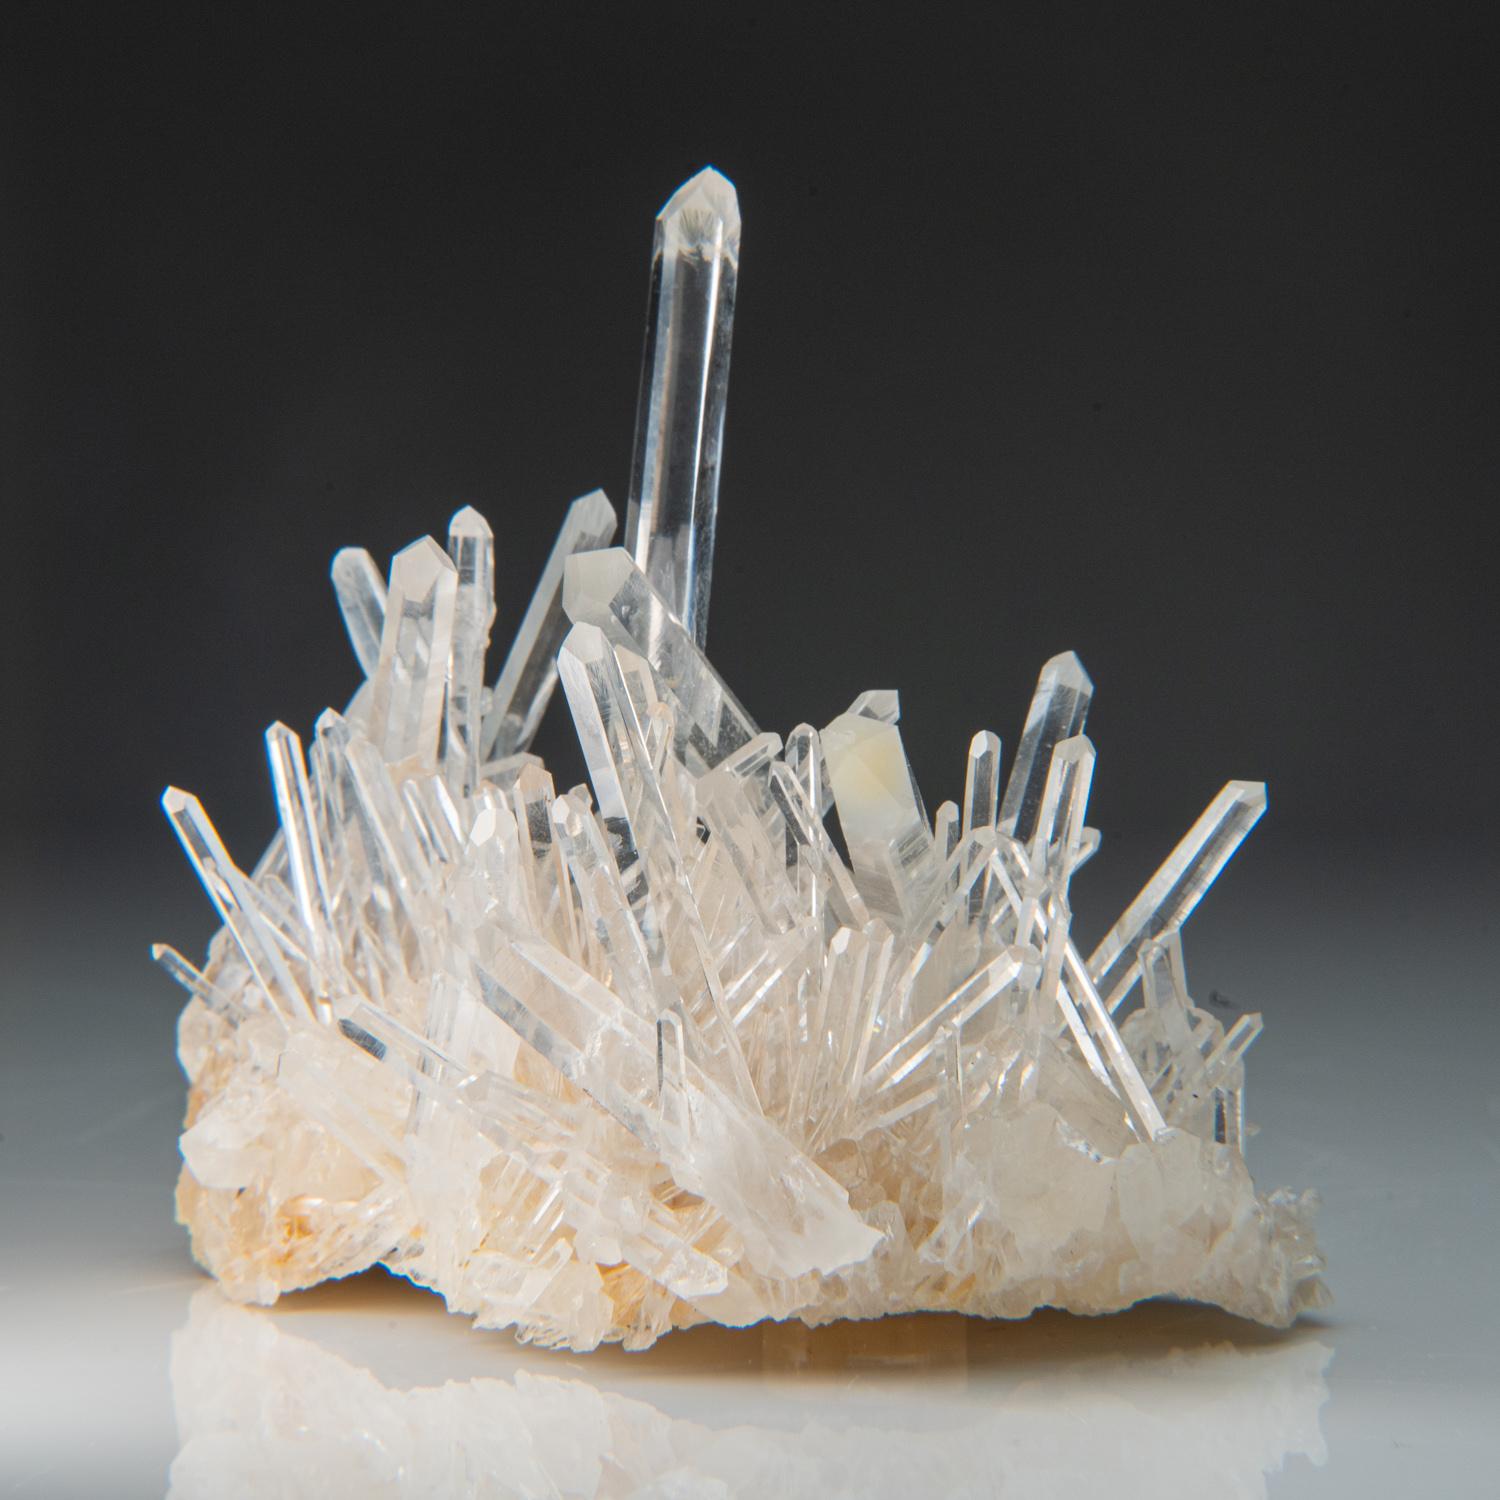 From Alto de Cruces, Suaita, Santander, Colombia

Authentic, cluster of many intersecting lustrous transparent colorless quartz crystals. The quartz crystals are exceptionally clean internally. The quartz cluster stands upright nicely without a